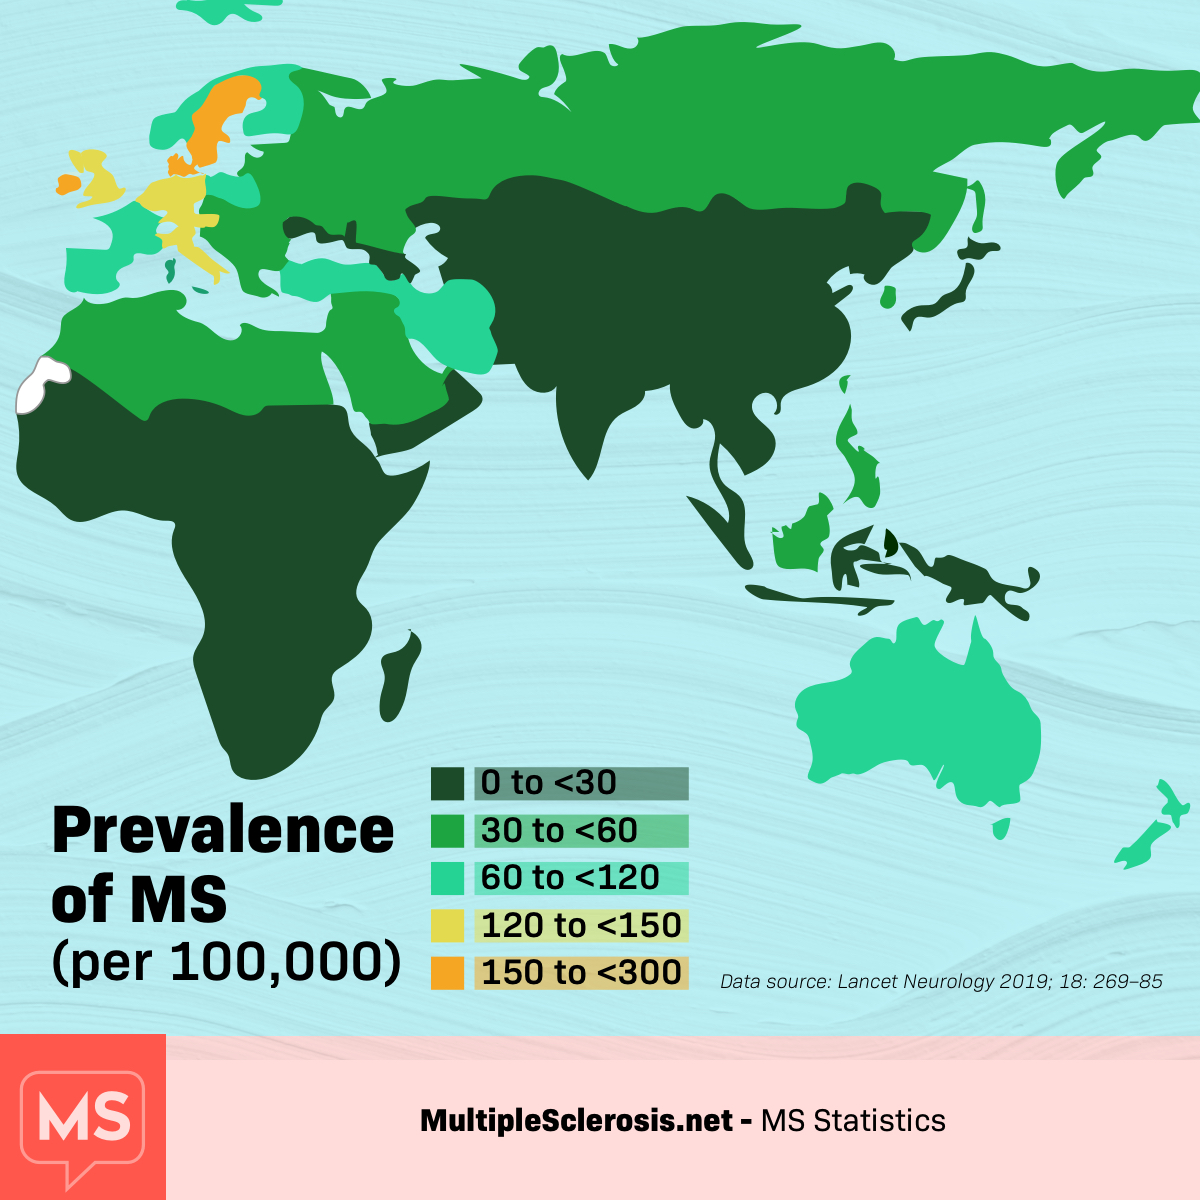 Map of Africa, Europe and Asia showing the prevalence of MS per 100,000.